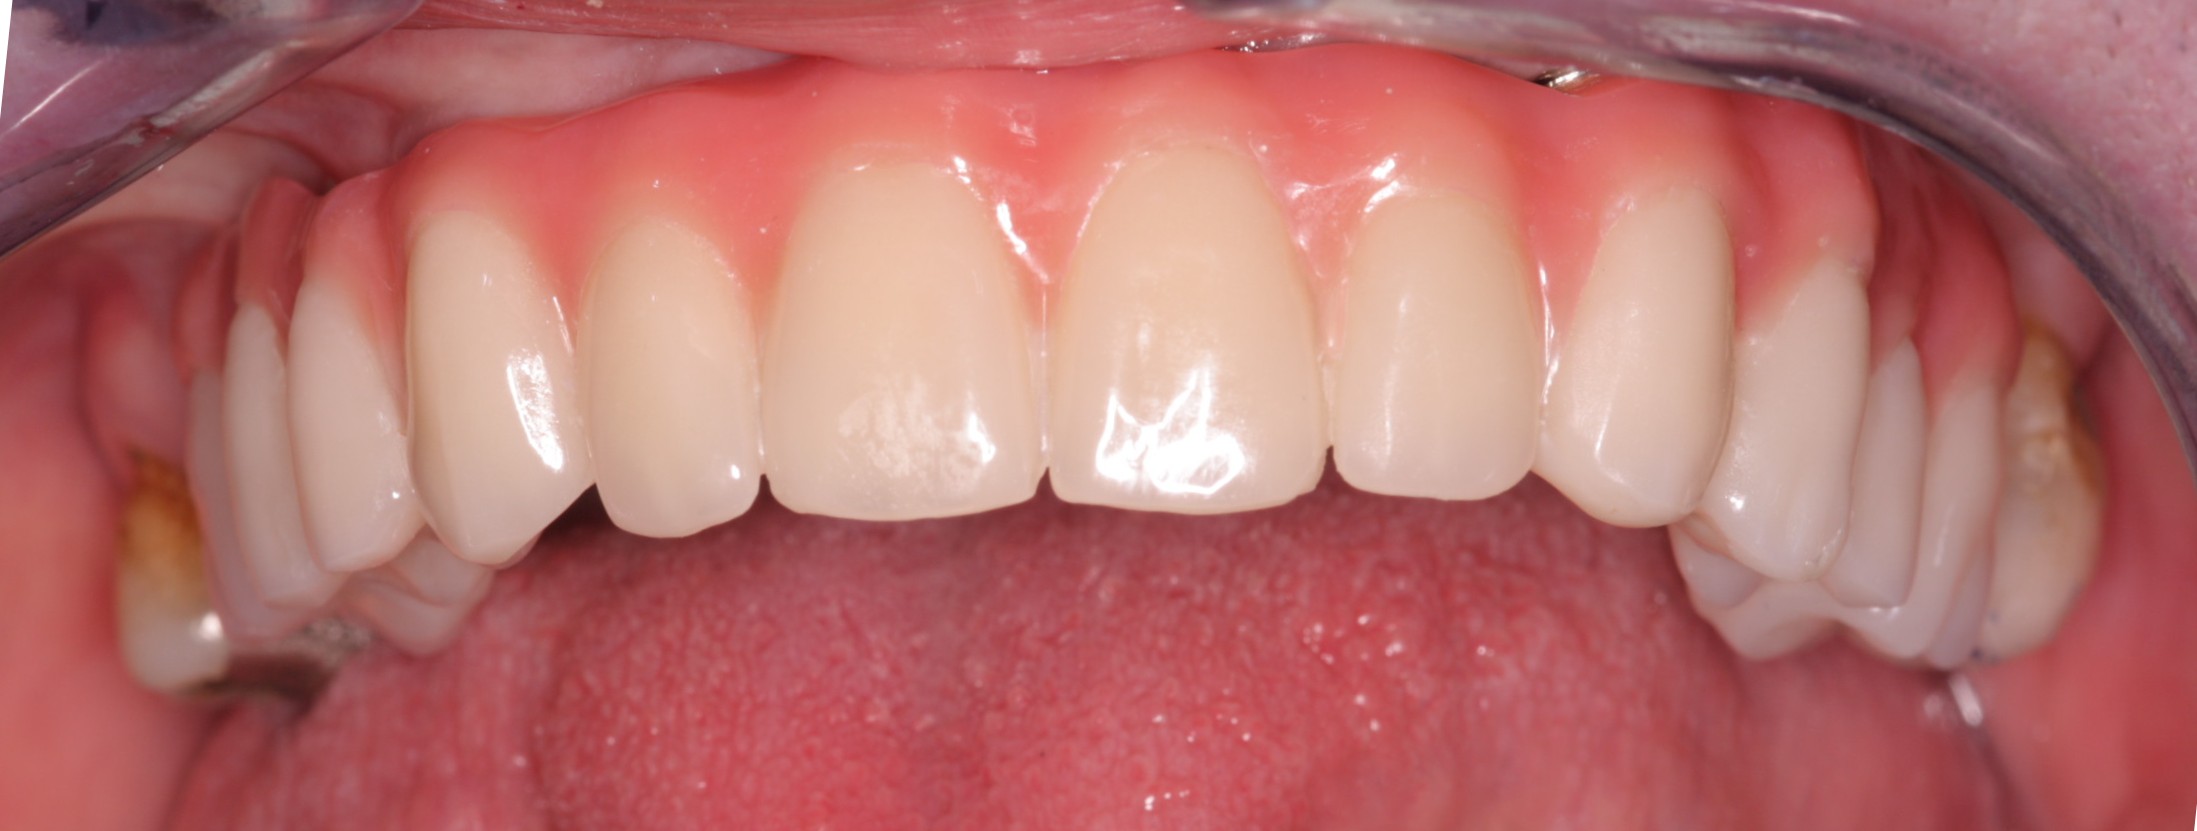 implant case study 4 after picture